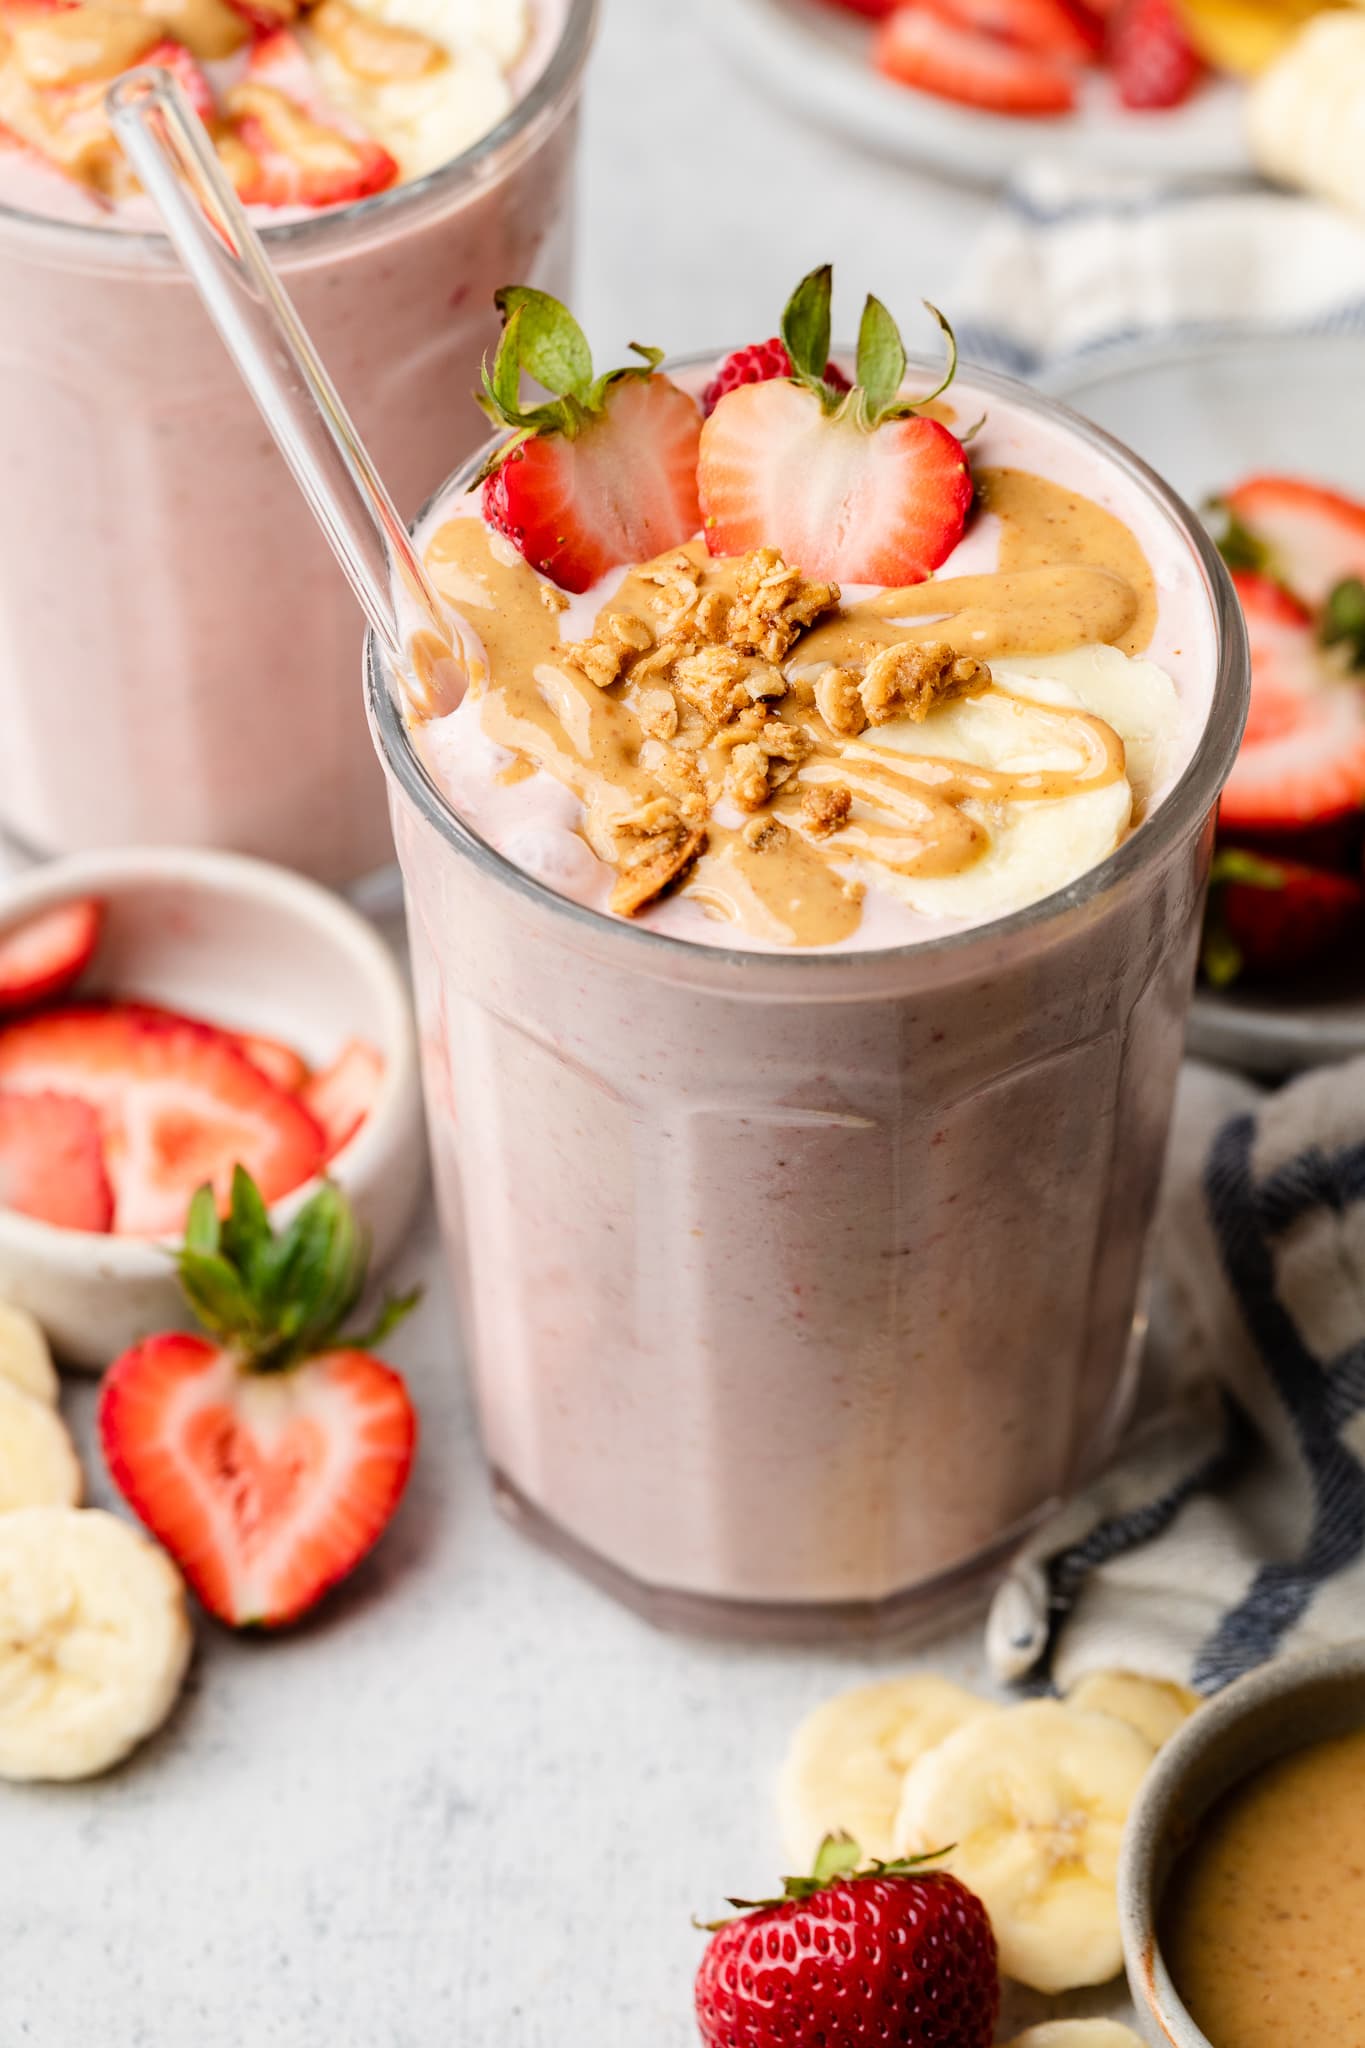 Strawberry Peanut Butter Smoothie - All the Healthy Things